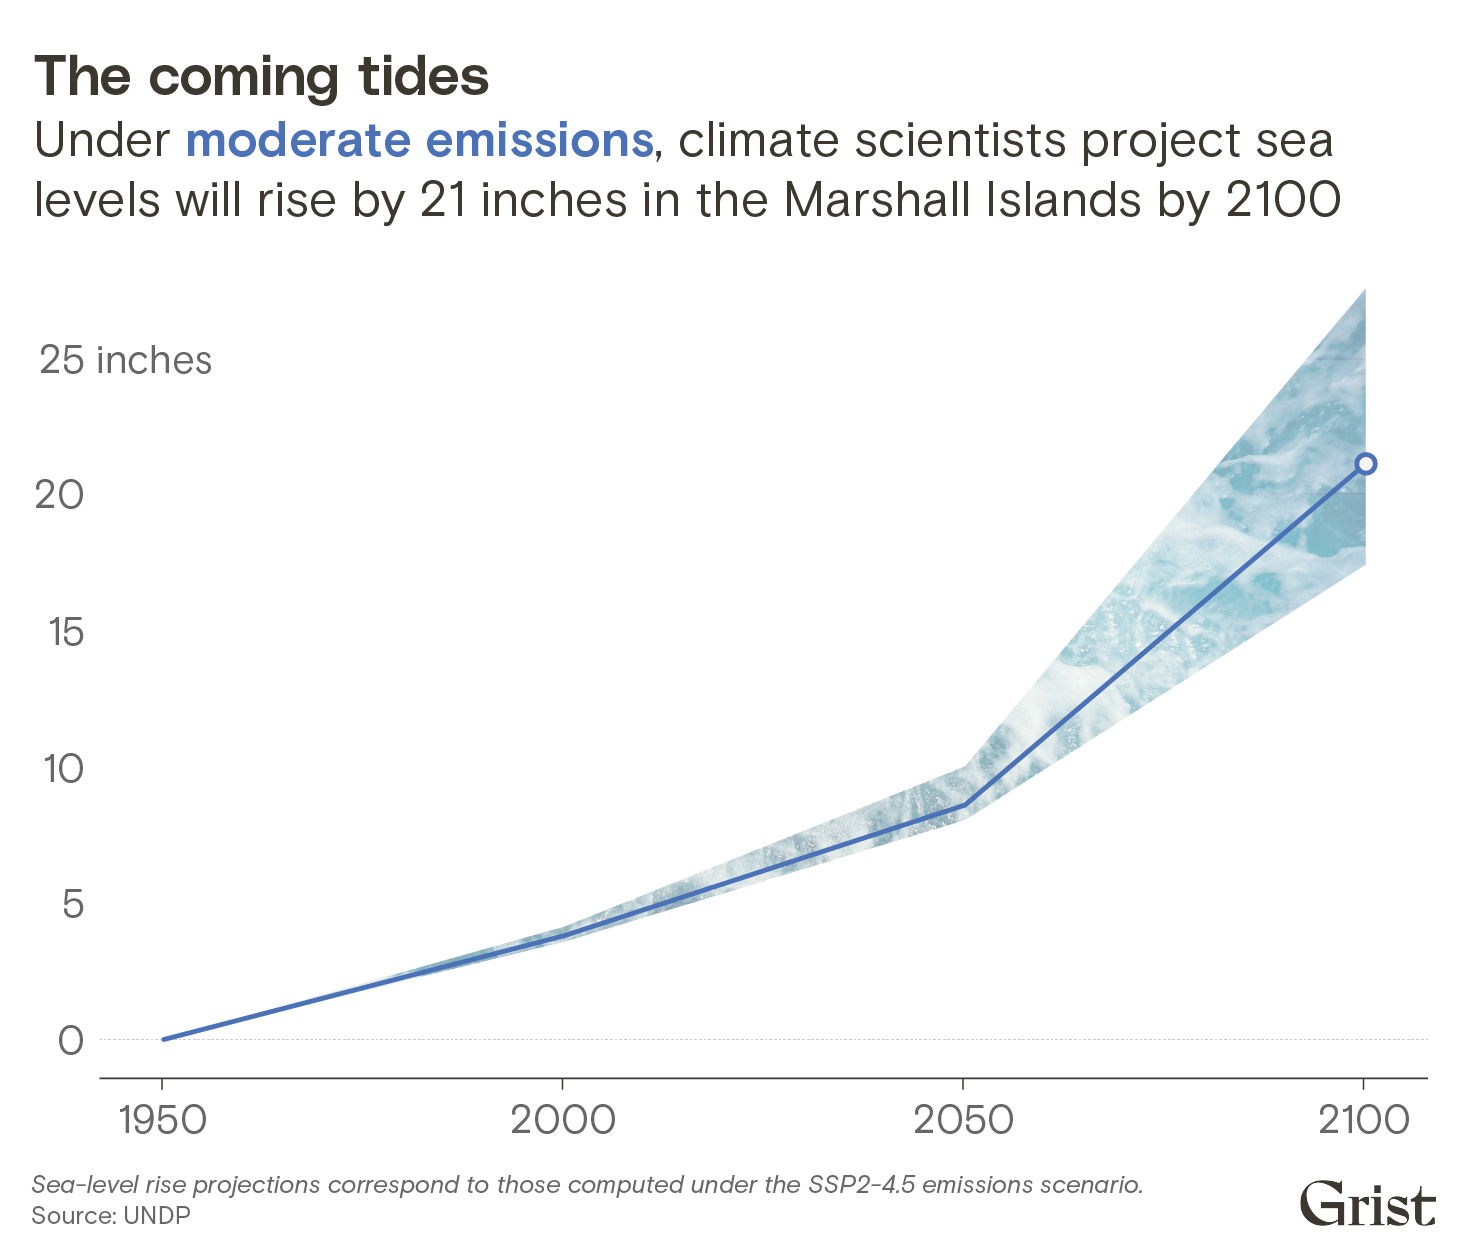 A line chart showing sea-level rise projections for the Marshall Islands under a moderate emissions scenario. By 2100, climate scientists expect local sea levels to rise by 21 inches.